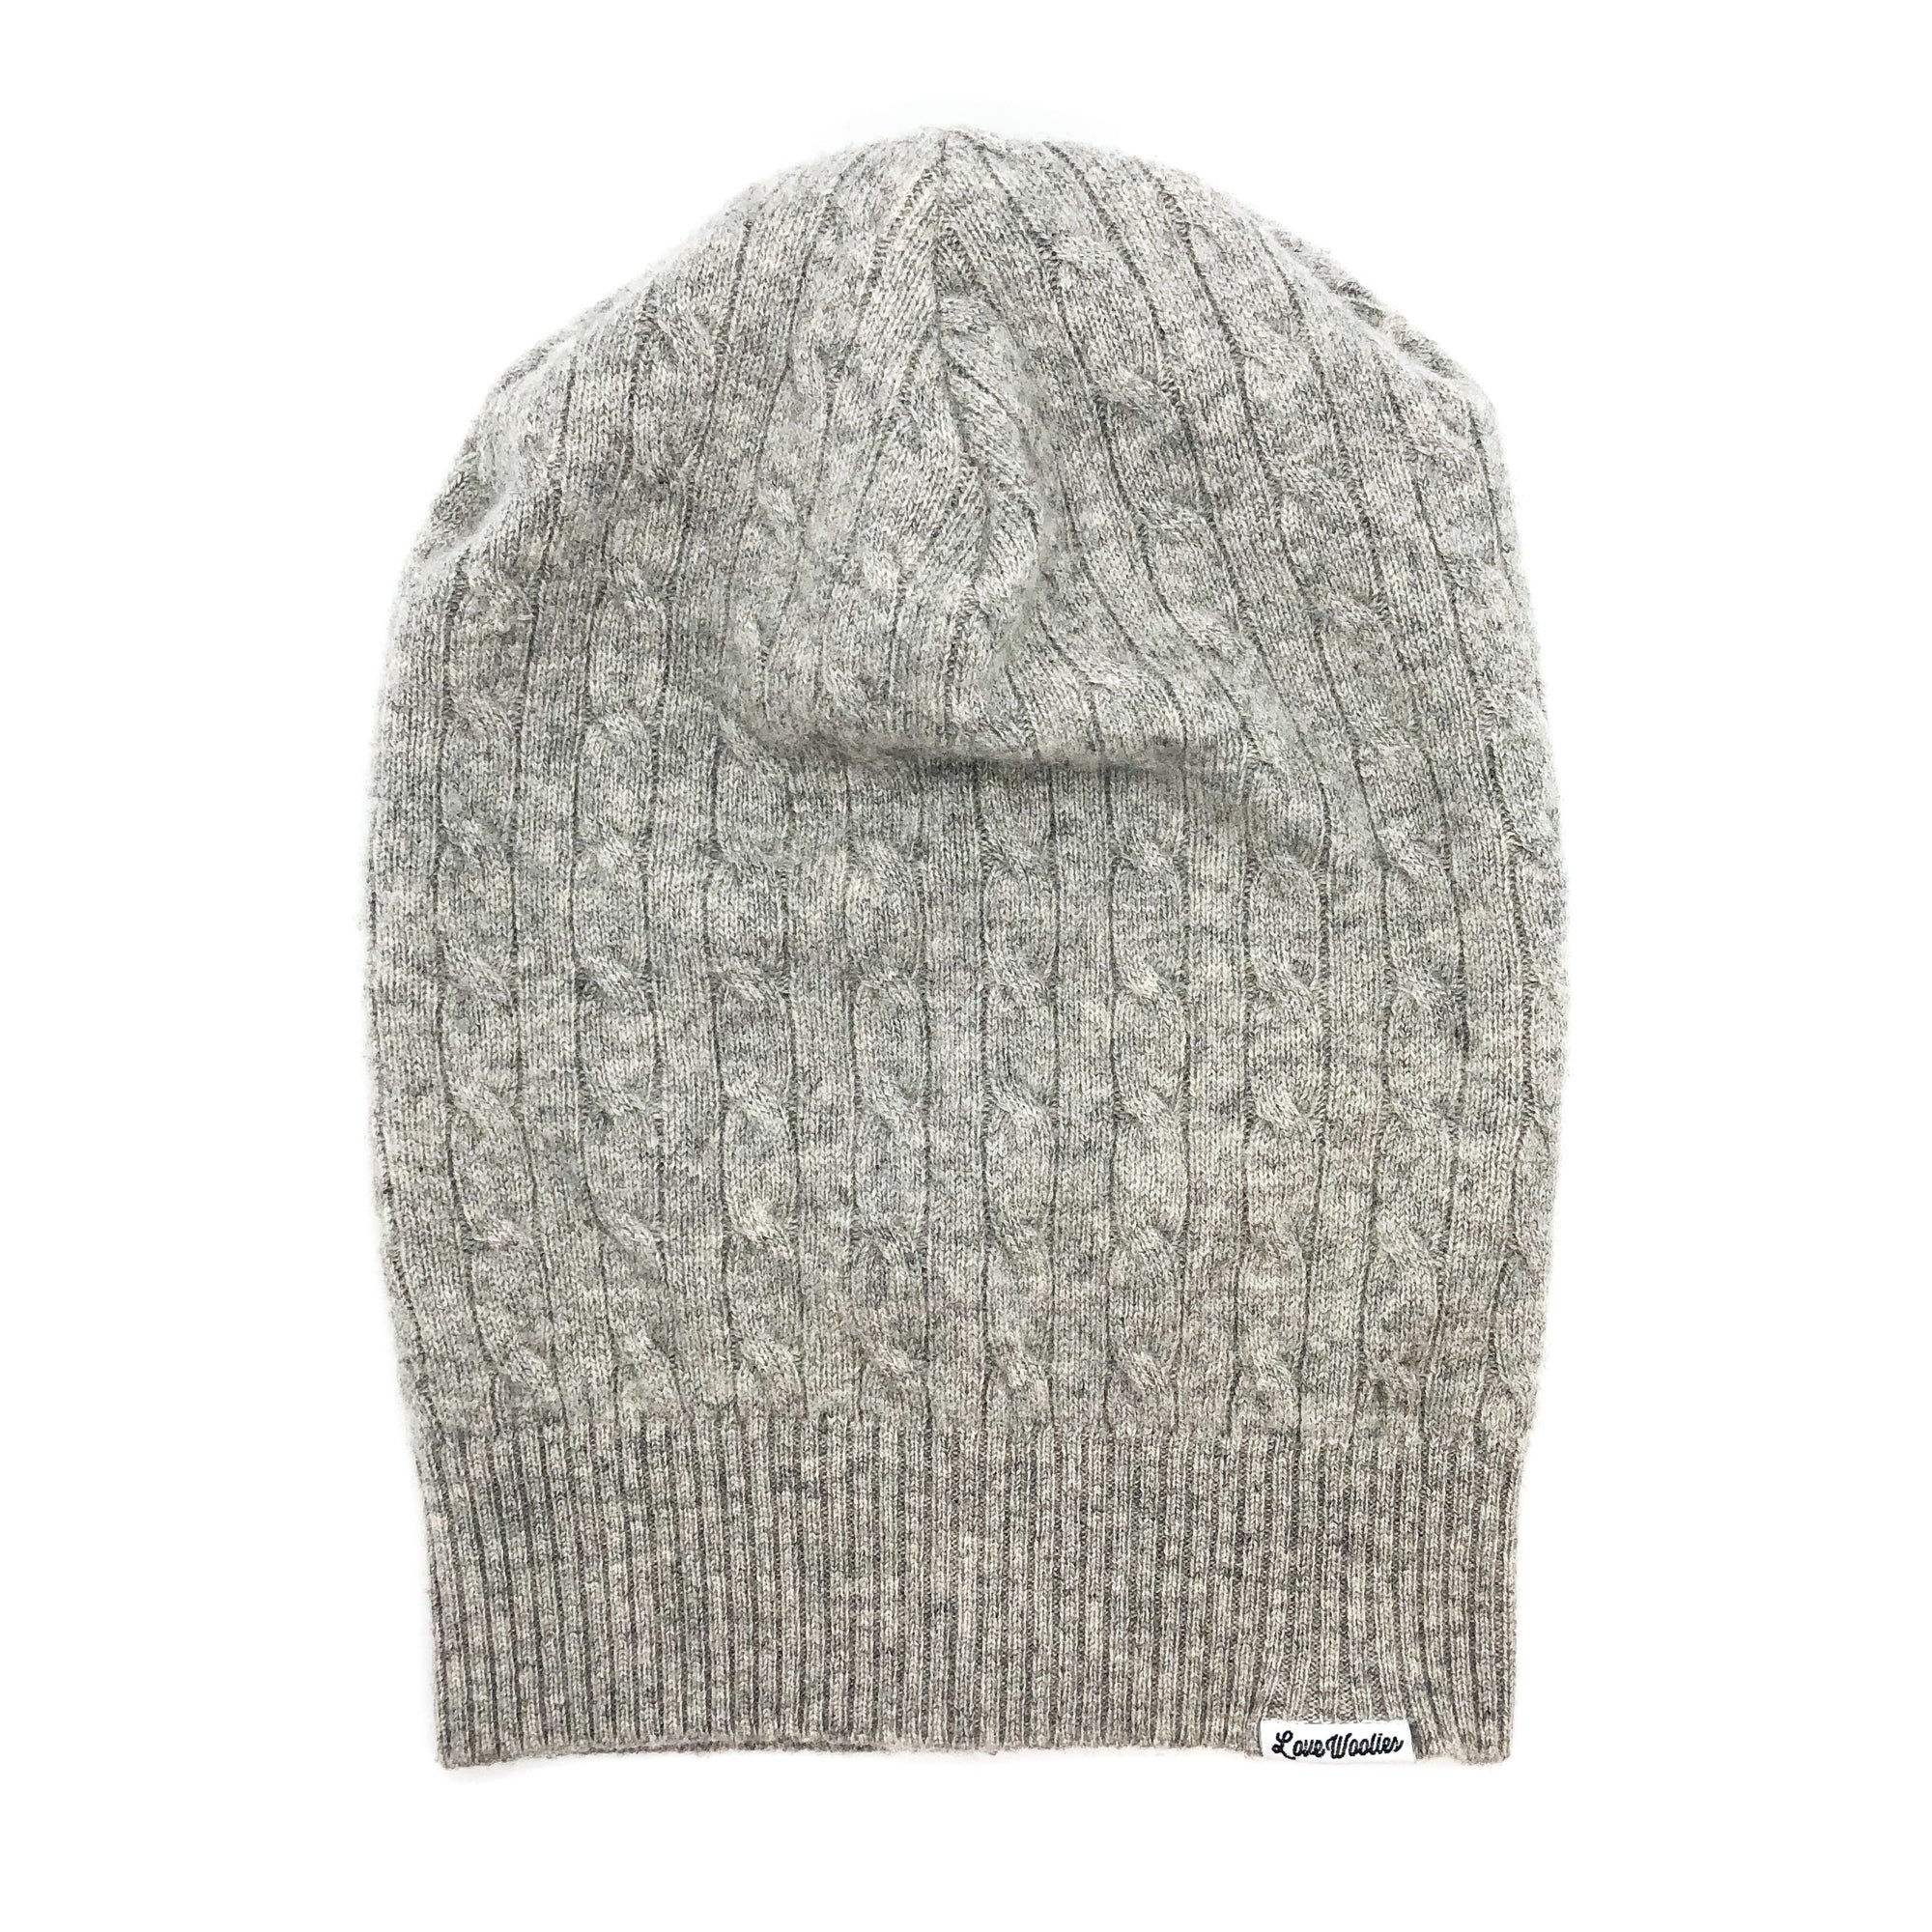 CASHMERE BEANIE | Grey Cable Knit